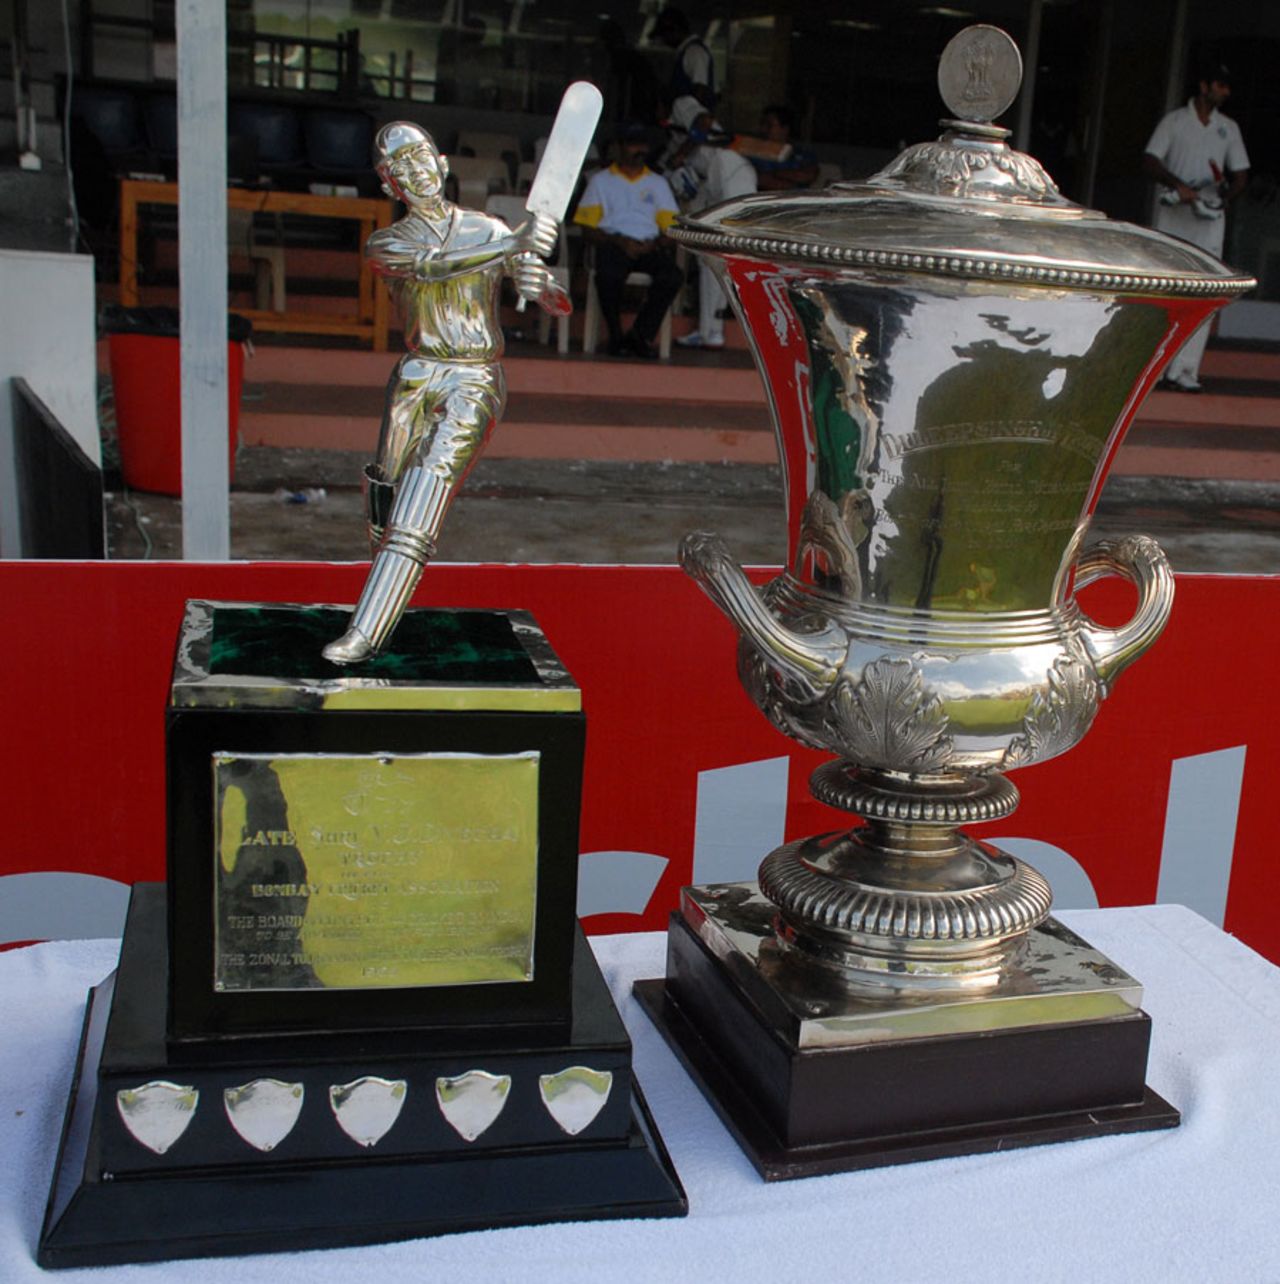 The spoils up for grabs at the Duleep Trophy, Central Zone v East Zone, Duleep Trophy final, 4th day, October 24, Chennai